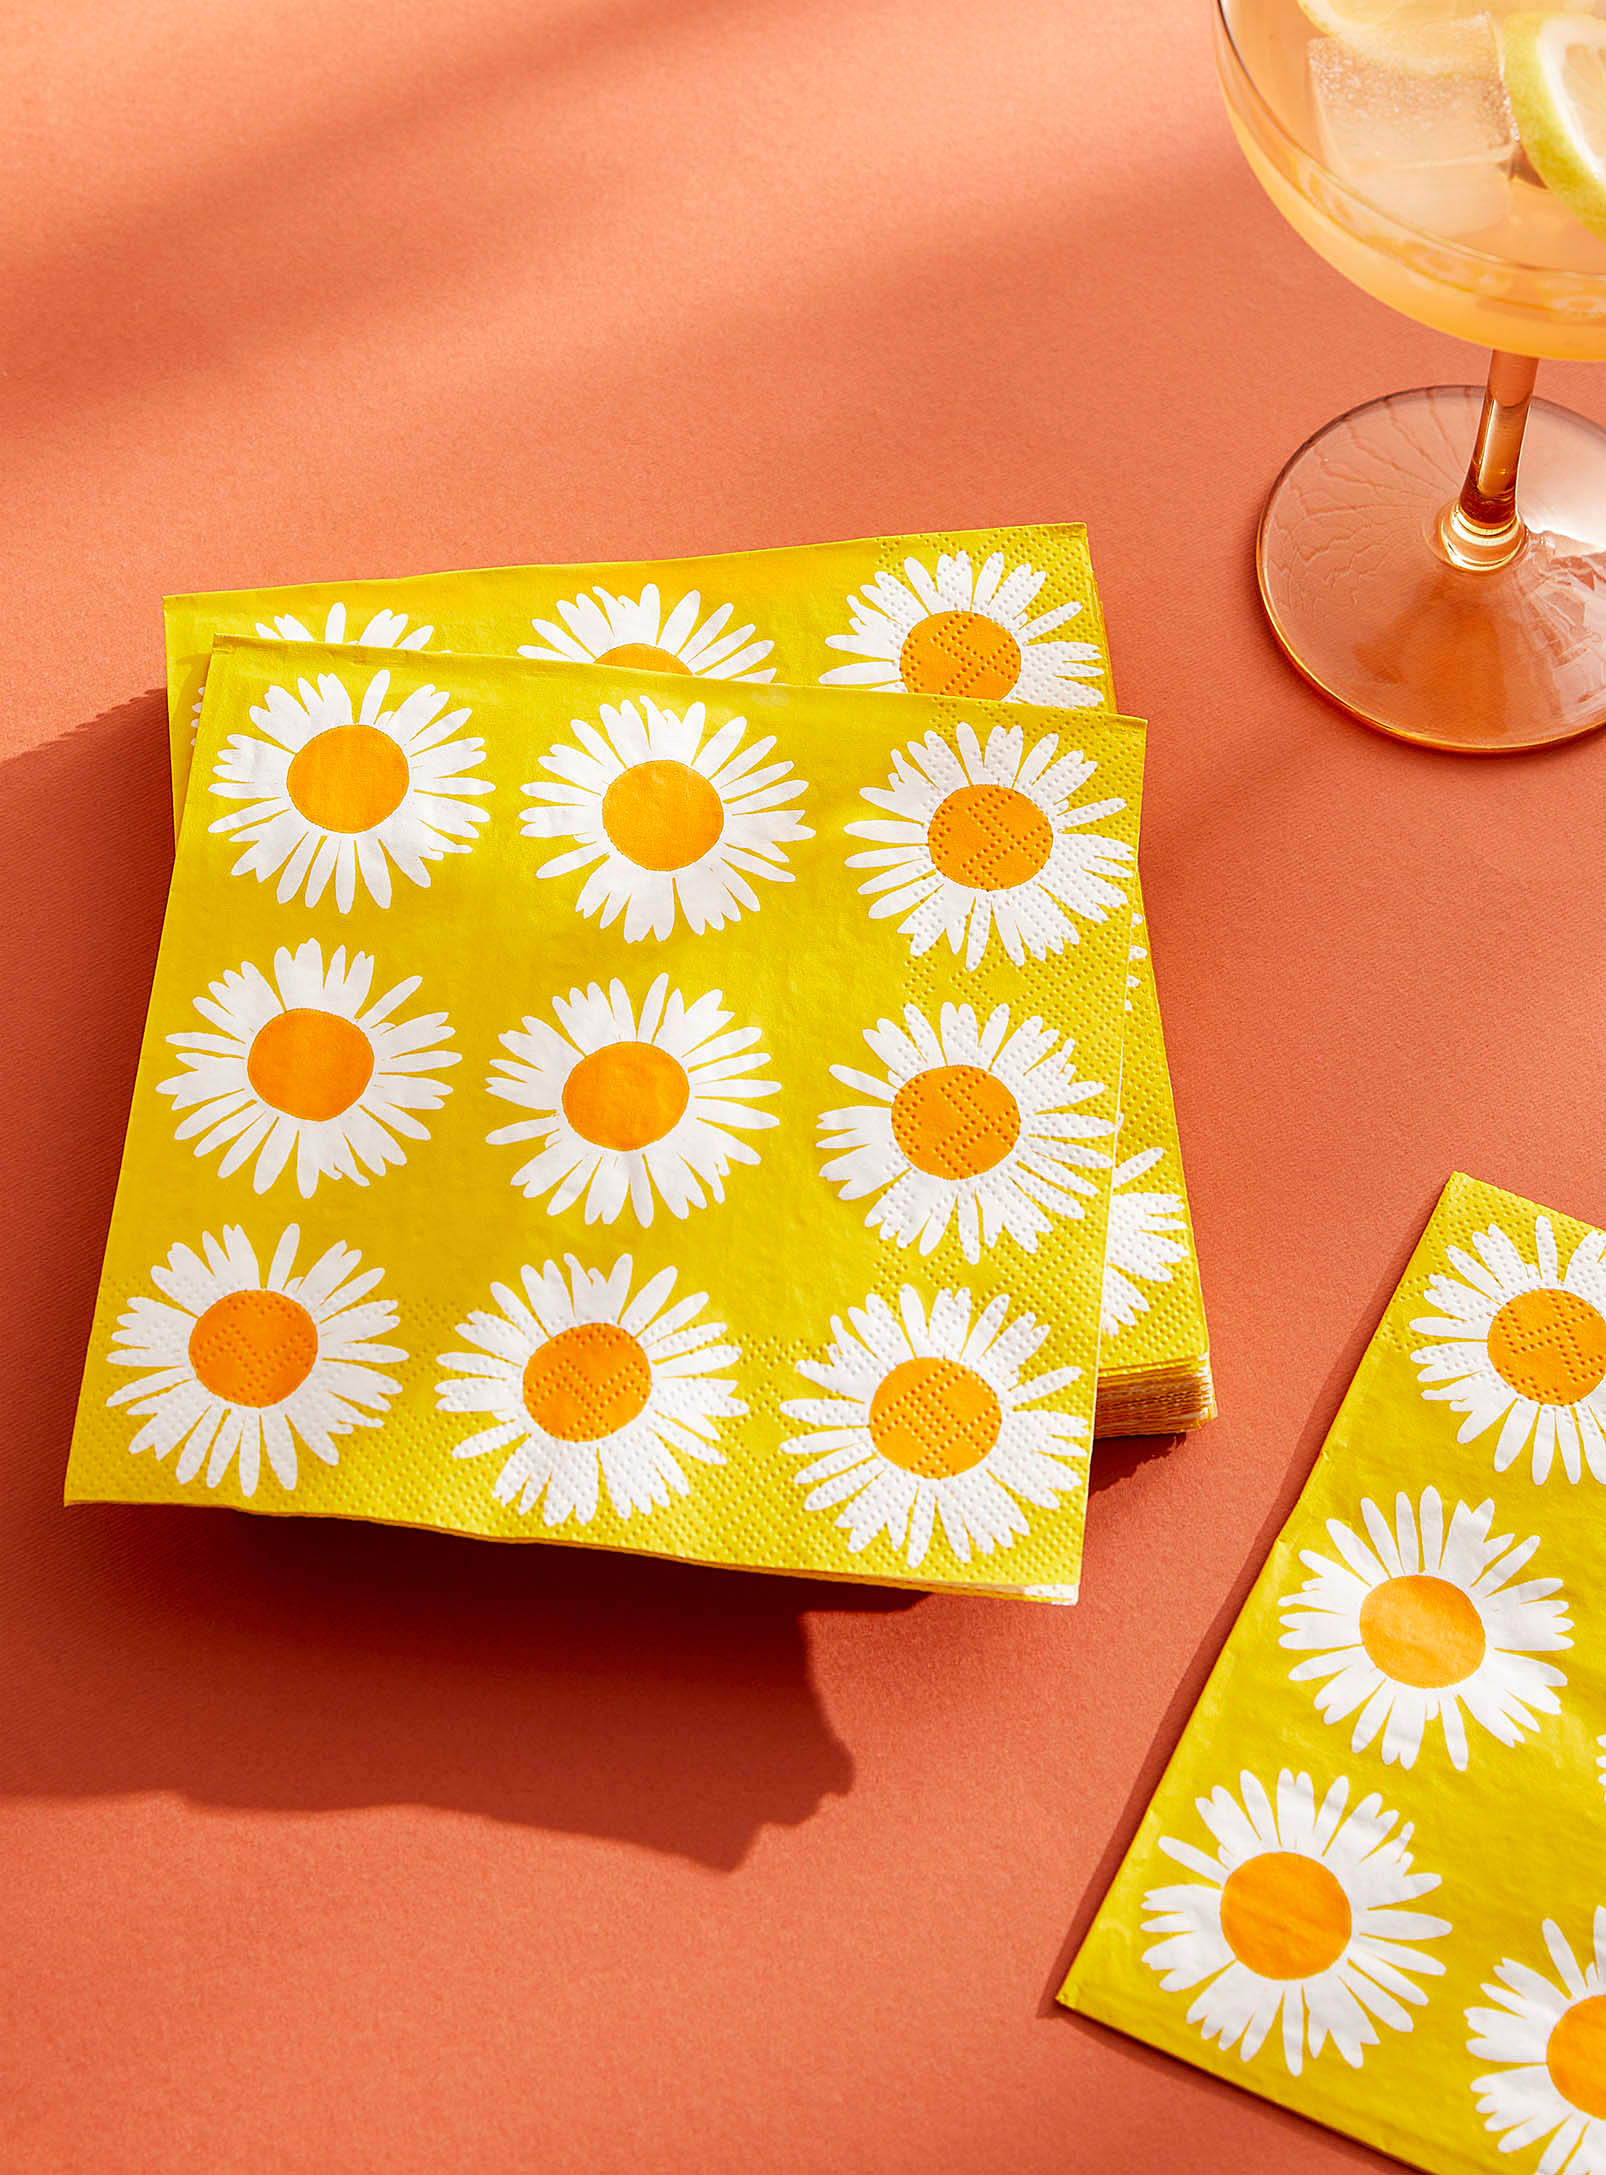 Marimekko Auringon Flowers Paper Napkins 16.5 X 16.5 Cm. Pack Of 20. In Patterned Yellow